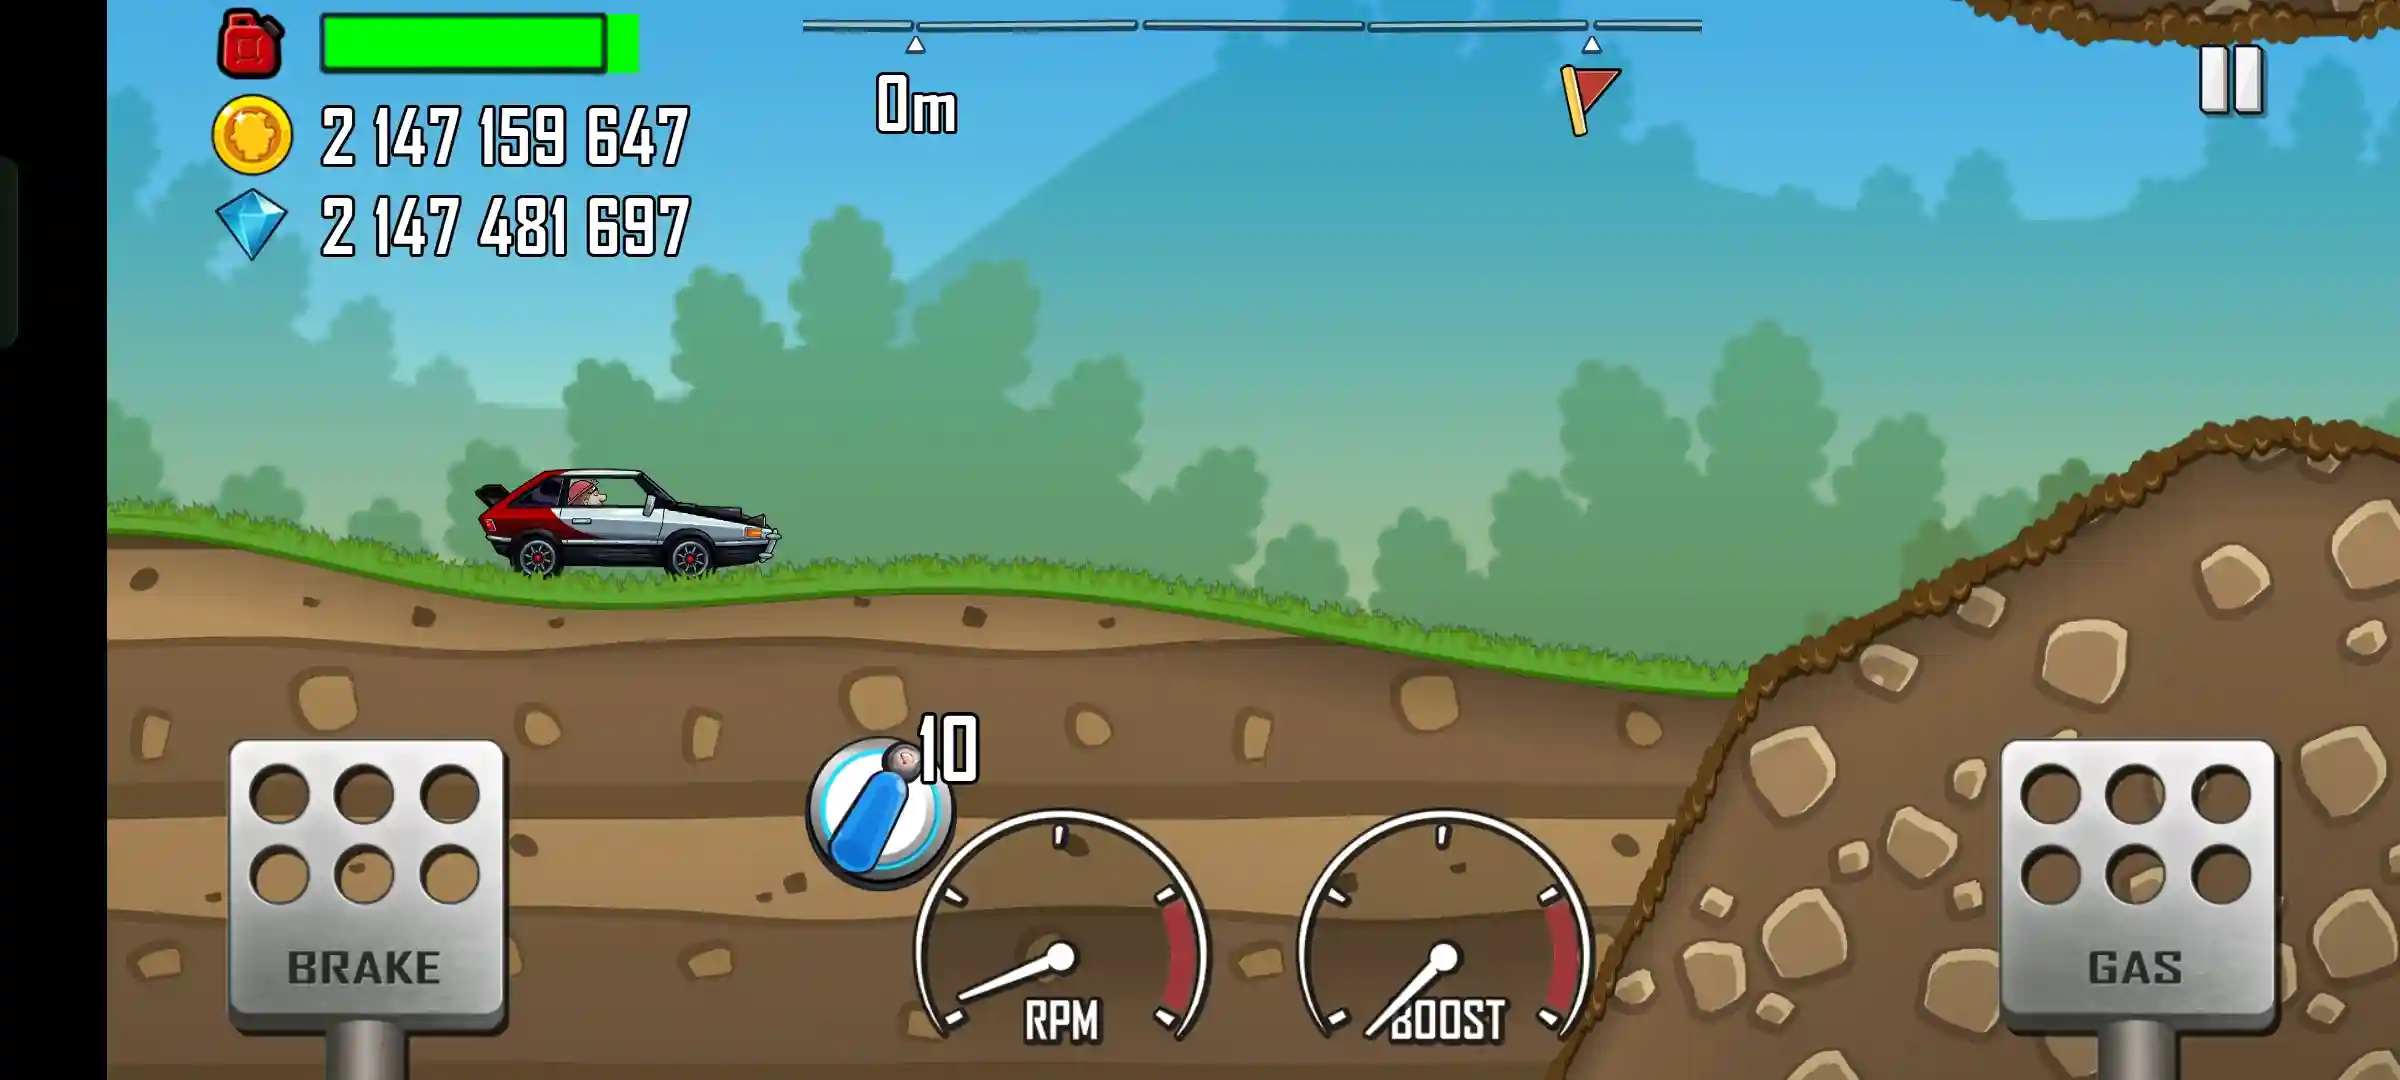 Hill Climb Racing+ Is Out Now For Apple Arcade! • Fingersoft : r/ HillClimbRacing